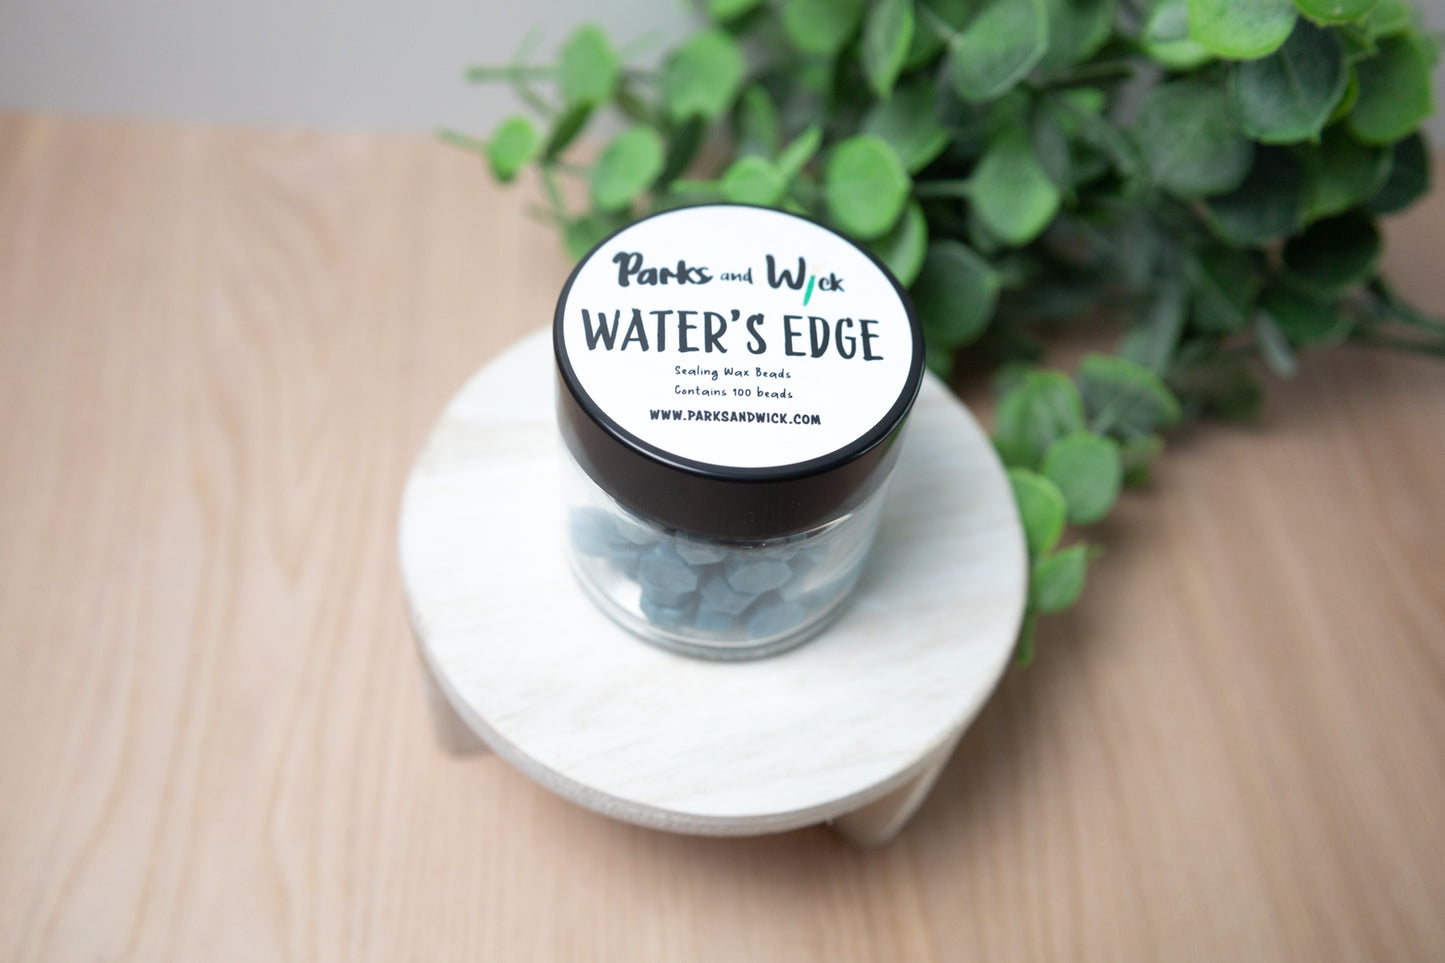 Water's Edge Wax Seal Beads | Wax Seal Beads | Parks and Wick